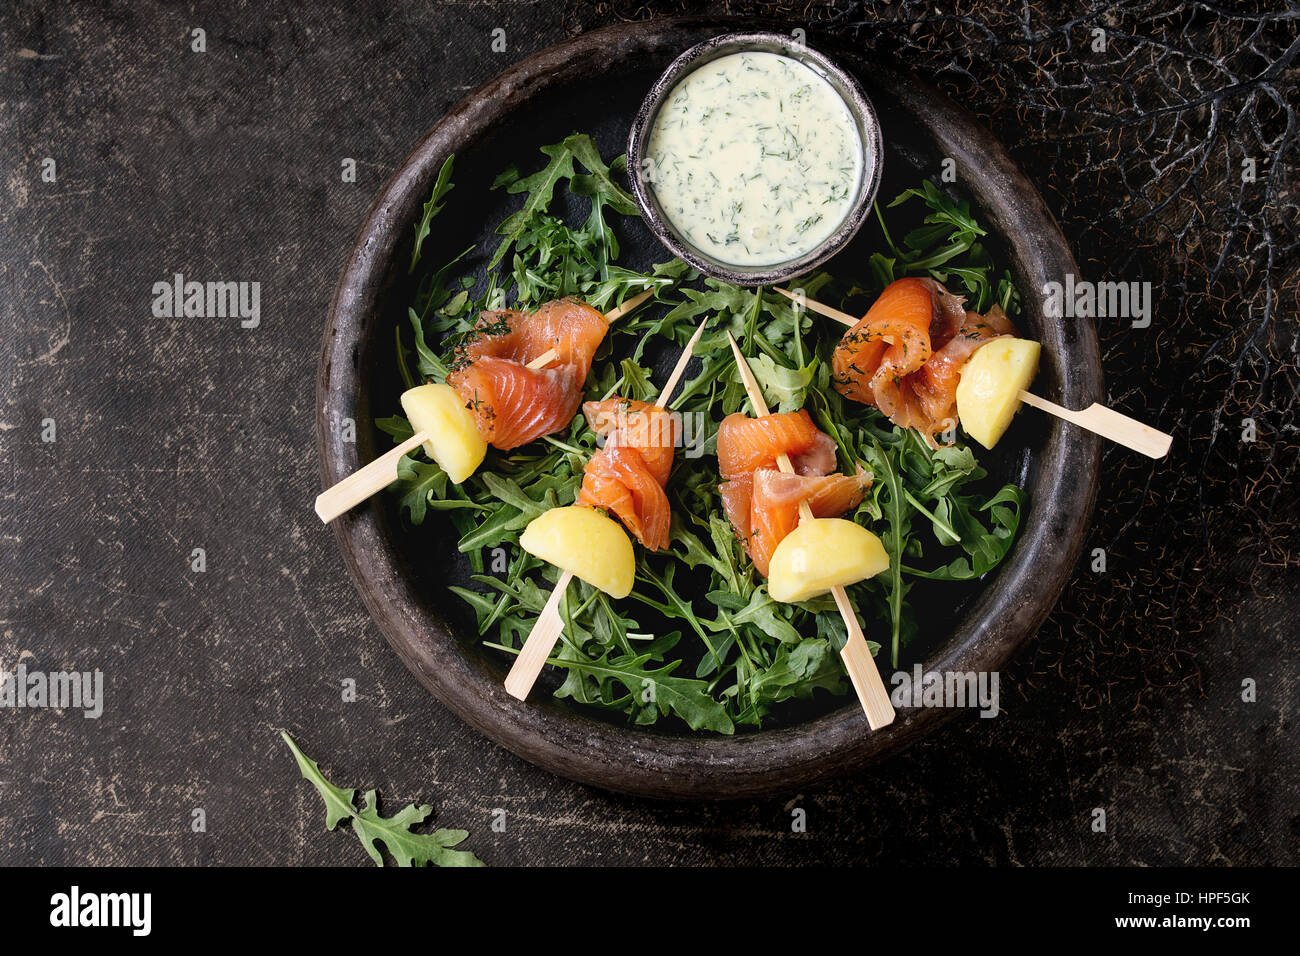 Delicious Appetizer with smoked salted salmon and boiled potatoes on skewers served with creamy dill sauce and arugula in stone plate over dark backgr Stock Photo